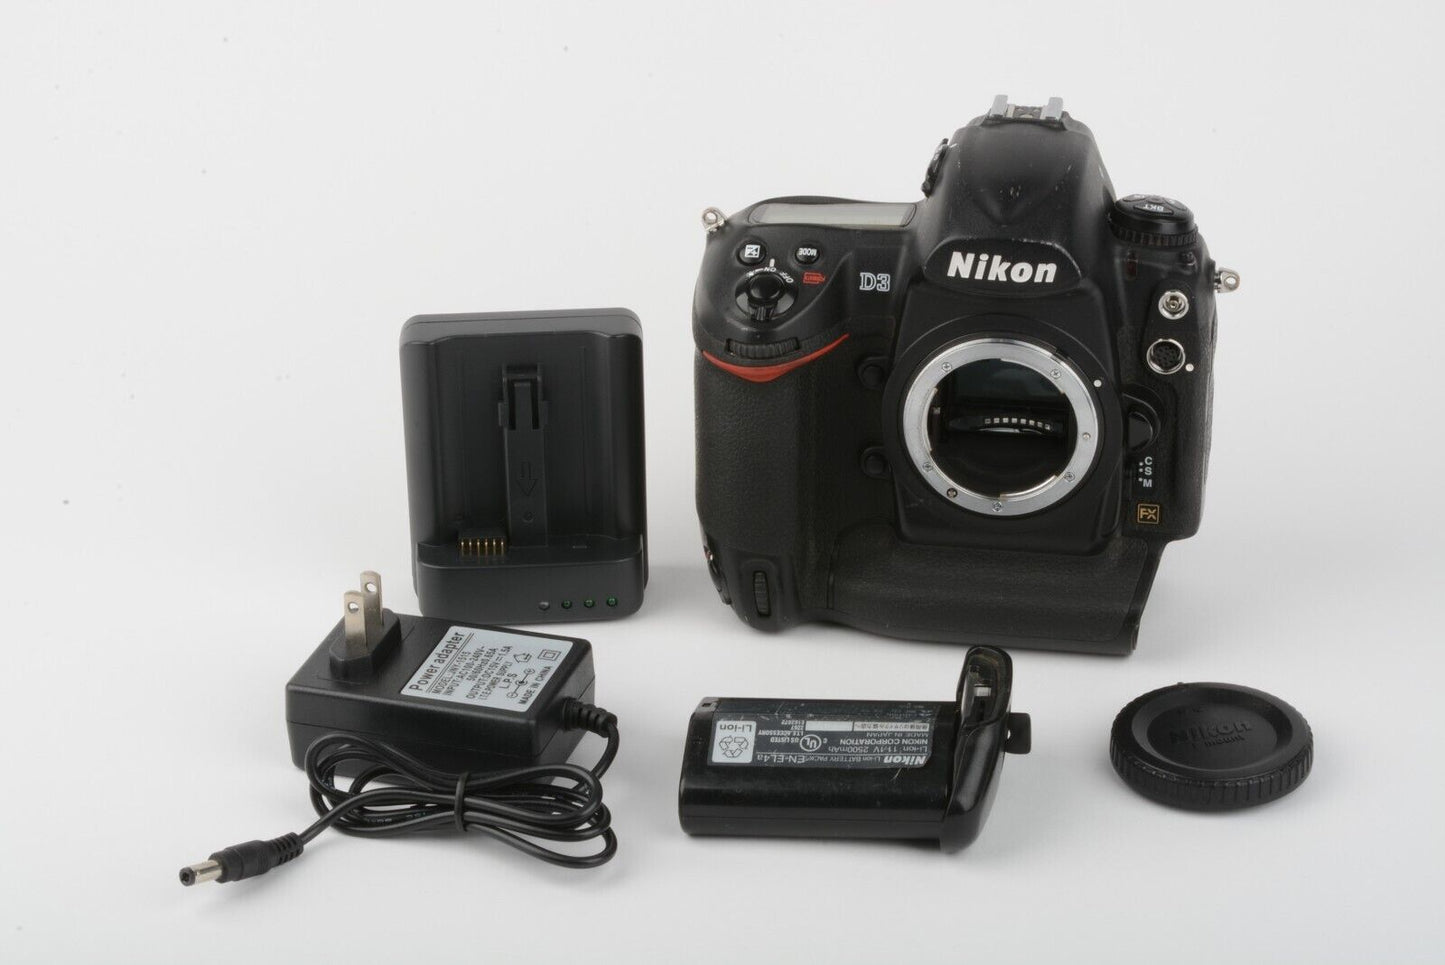 Nikon D3 12.1MP DSLR body, batt., AC/DC charger, cap, tested, only 54K Acts!!